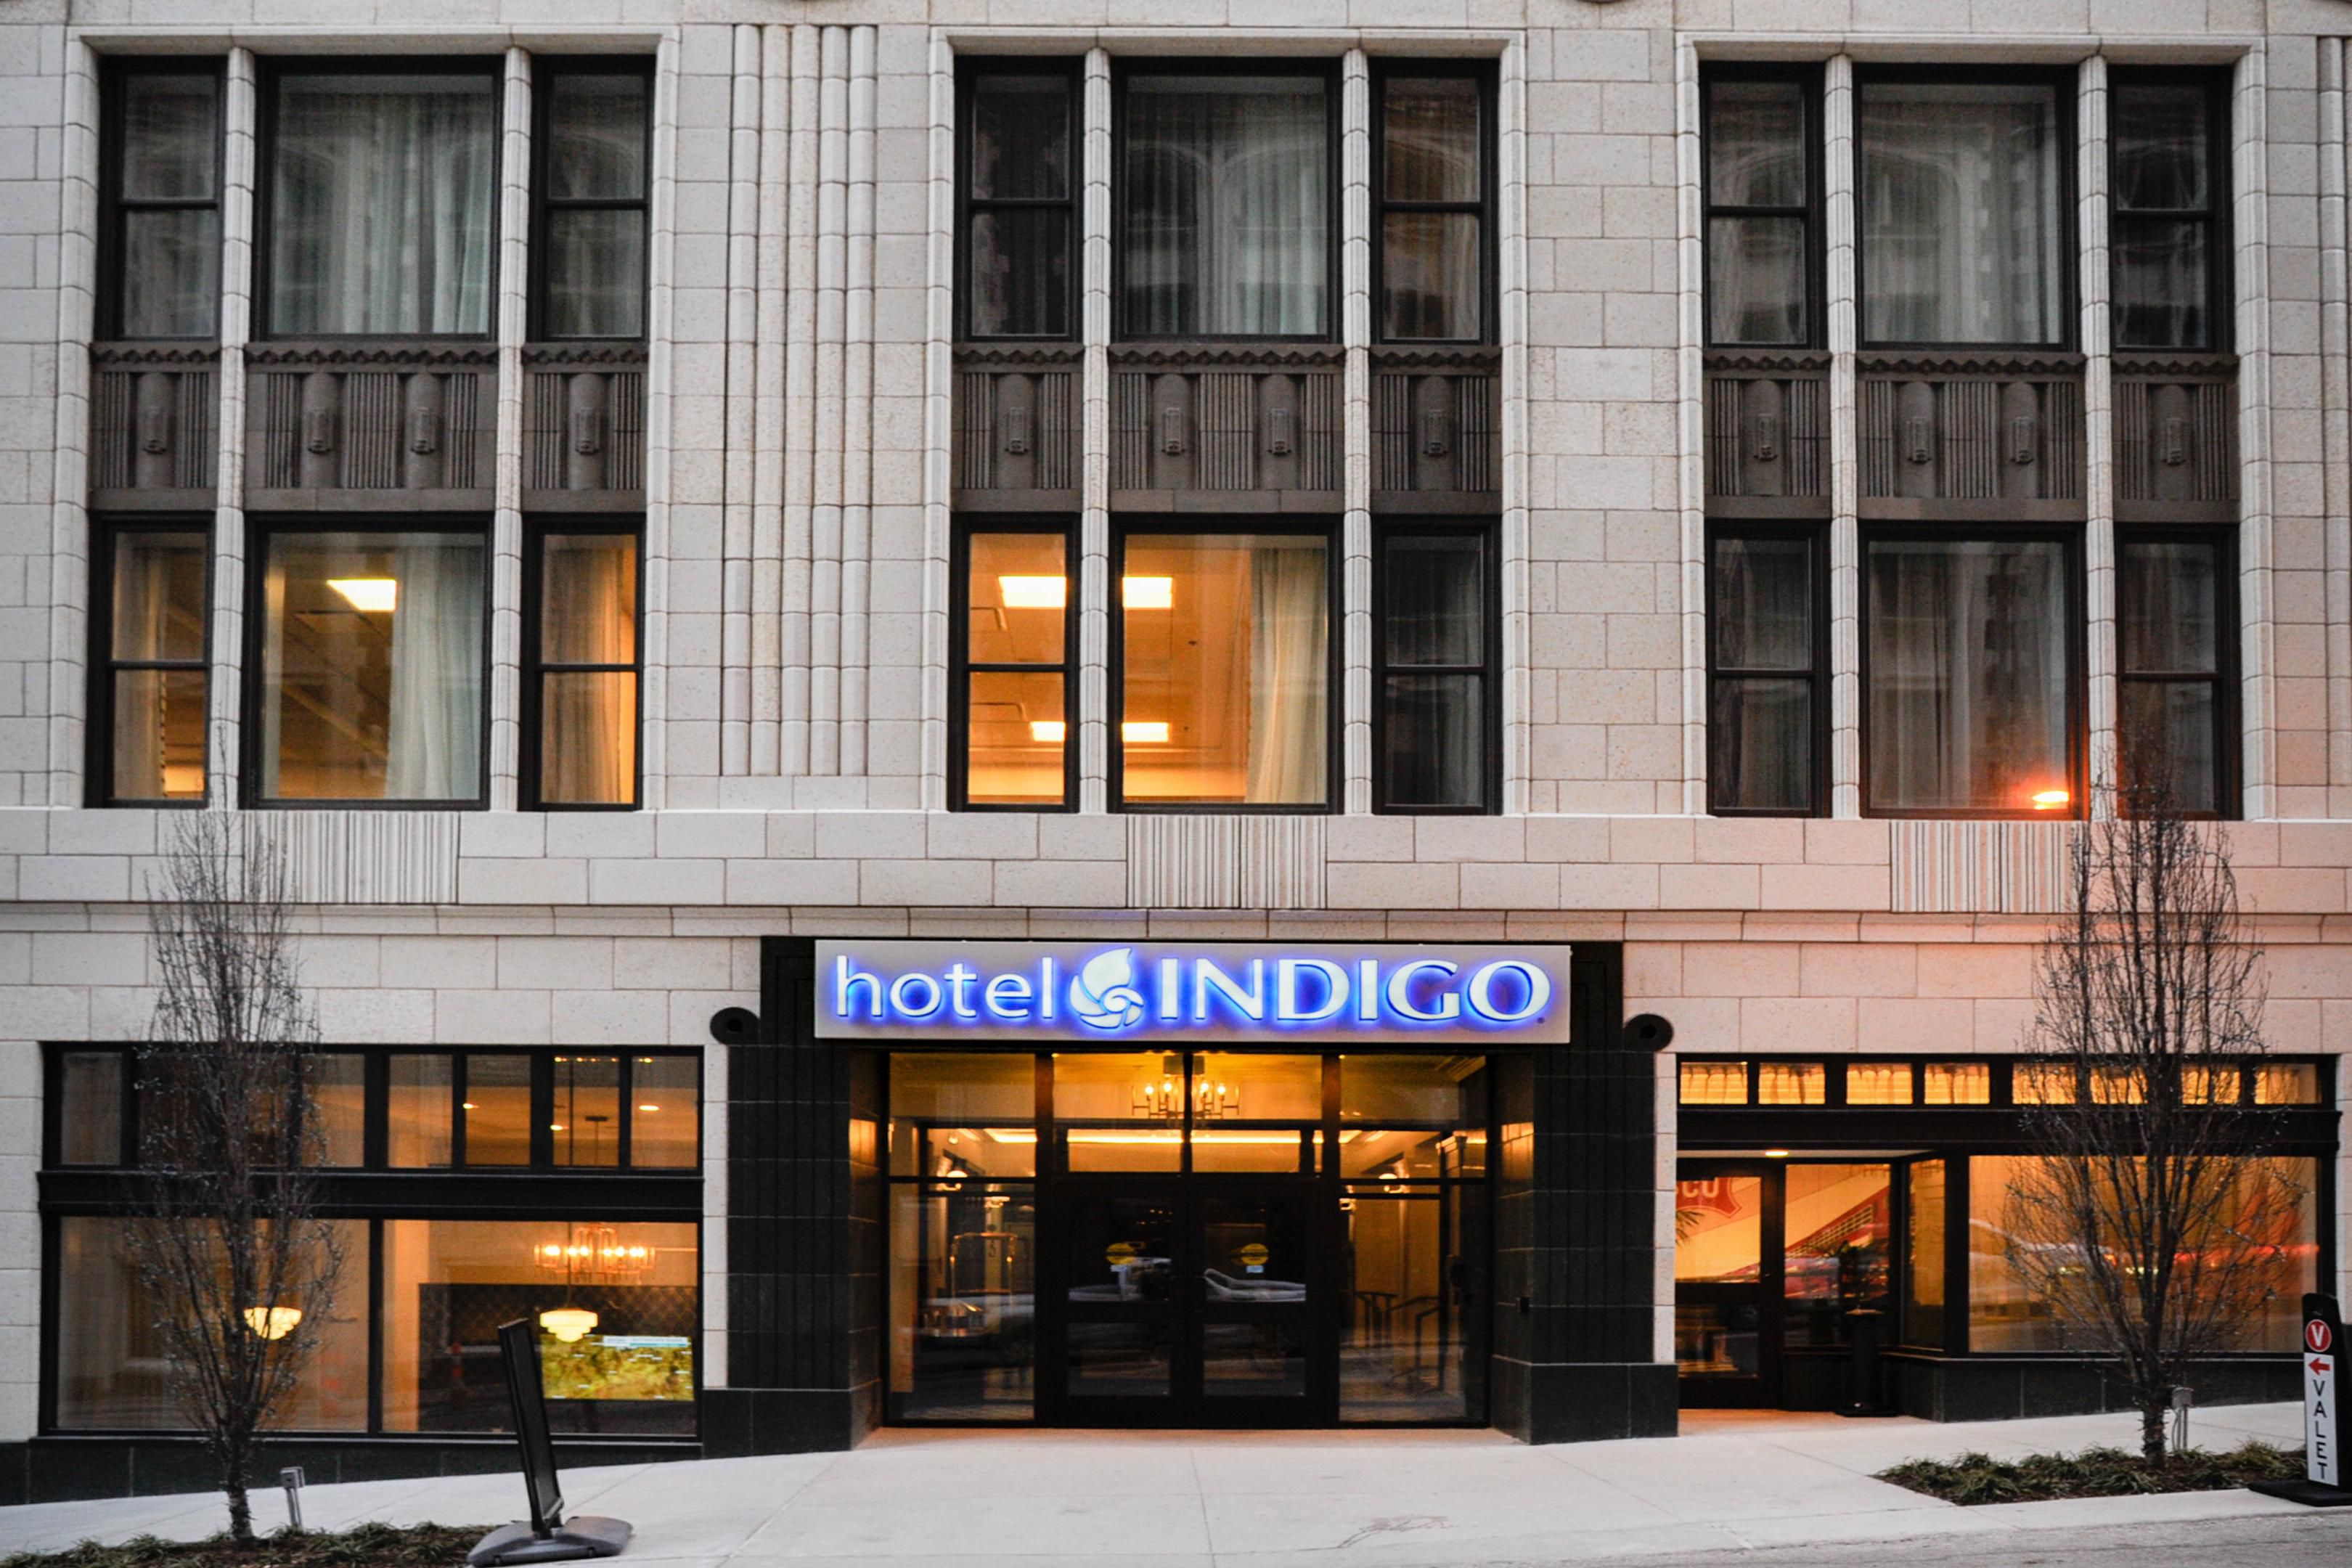 Don't leave your pet at home, bring them along as the Hotel Indigo Kansas City Downton is a pet friendly hotel!!